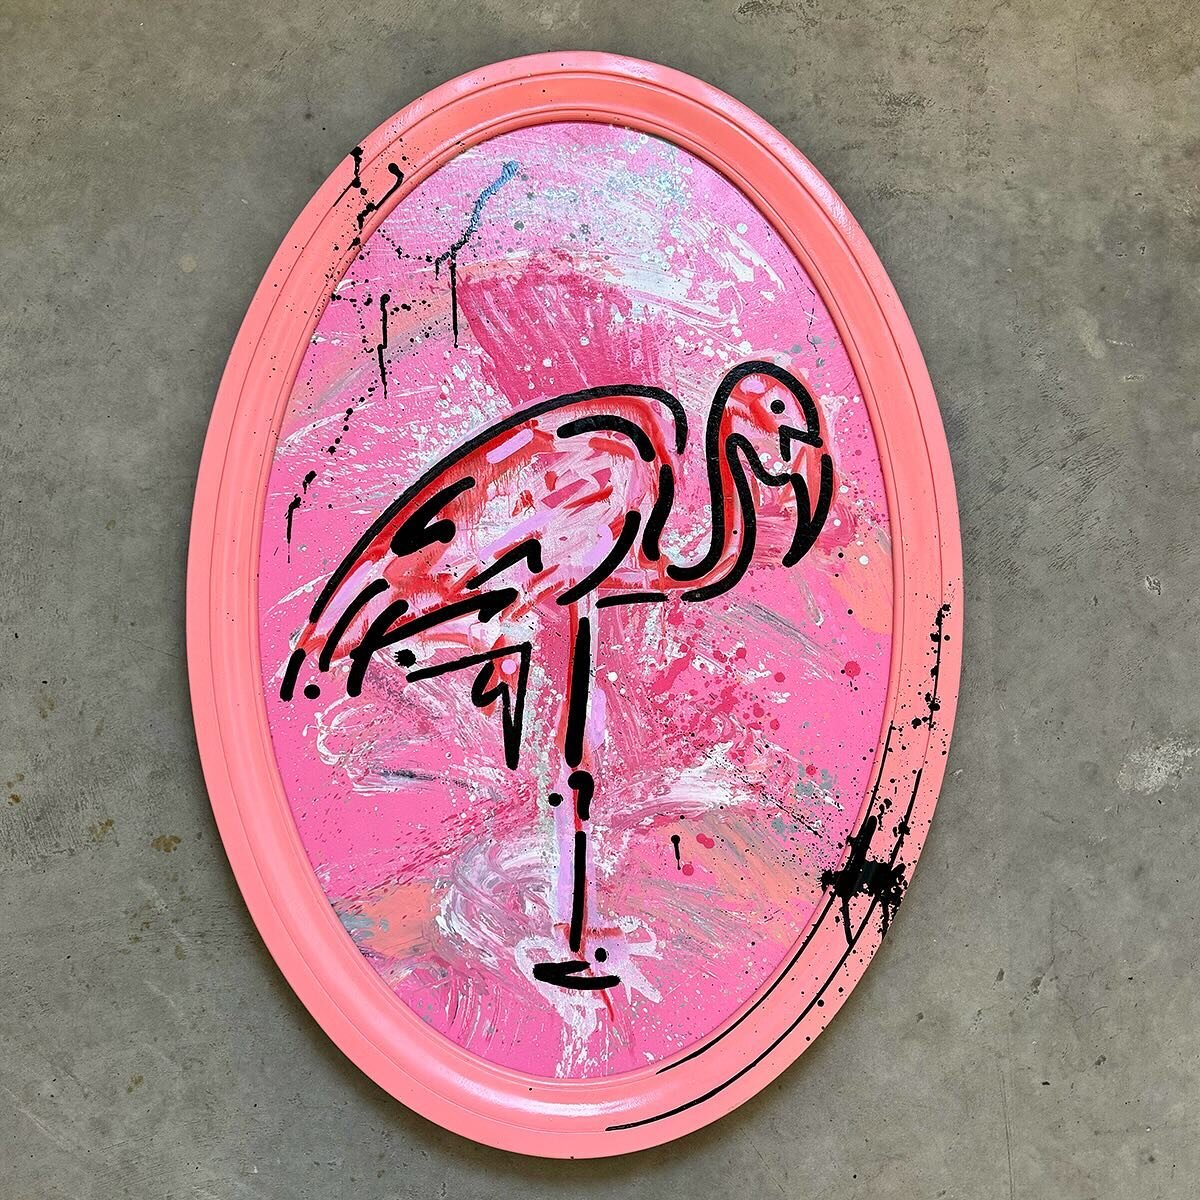 No feathers were ruffled during the creation of this vibrant pink flamingo painting. A tropical room setting should do nicely for &ldquo;Mingo Paint Spill&rdquo; 🦩

Acrylic on wood panel. Frame measures 36in x 25in 🥂